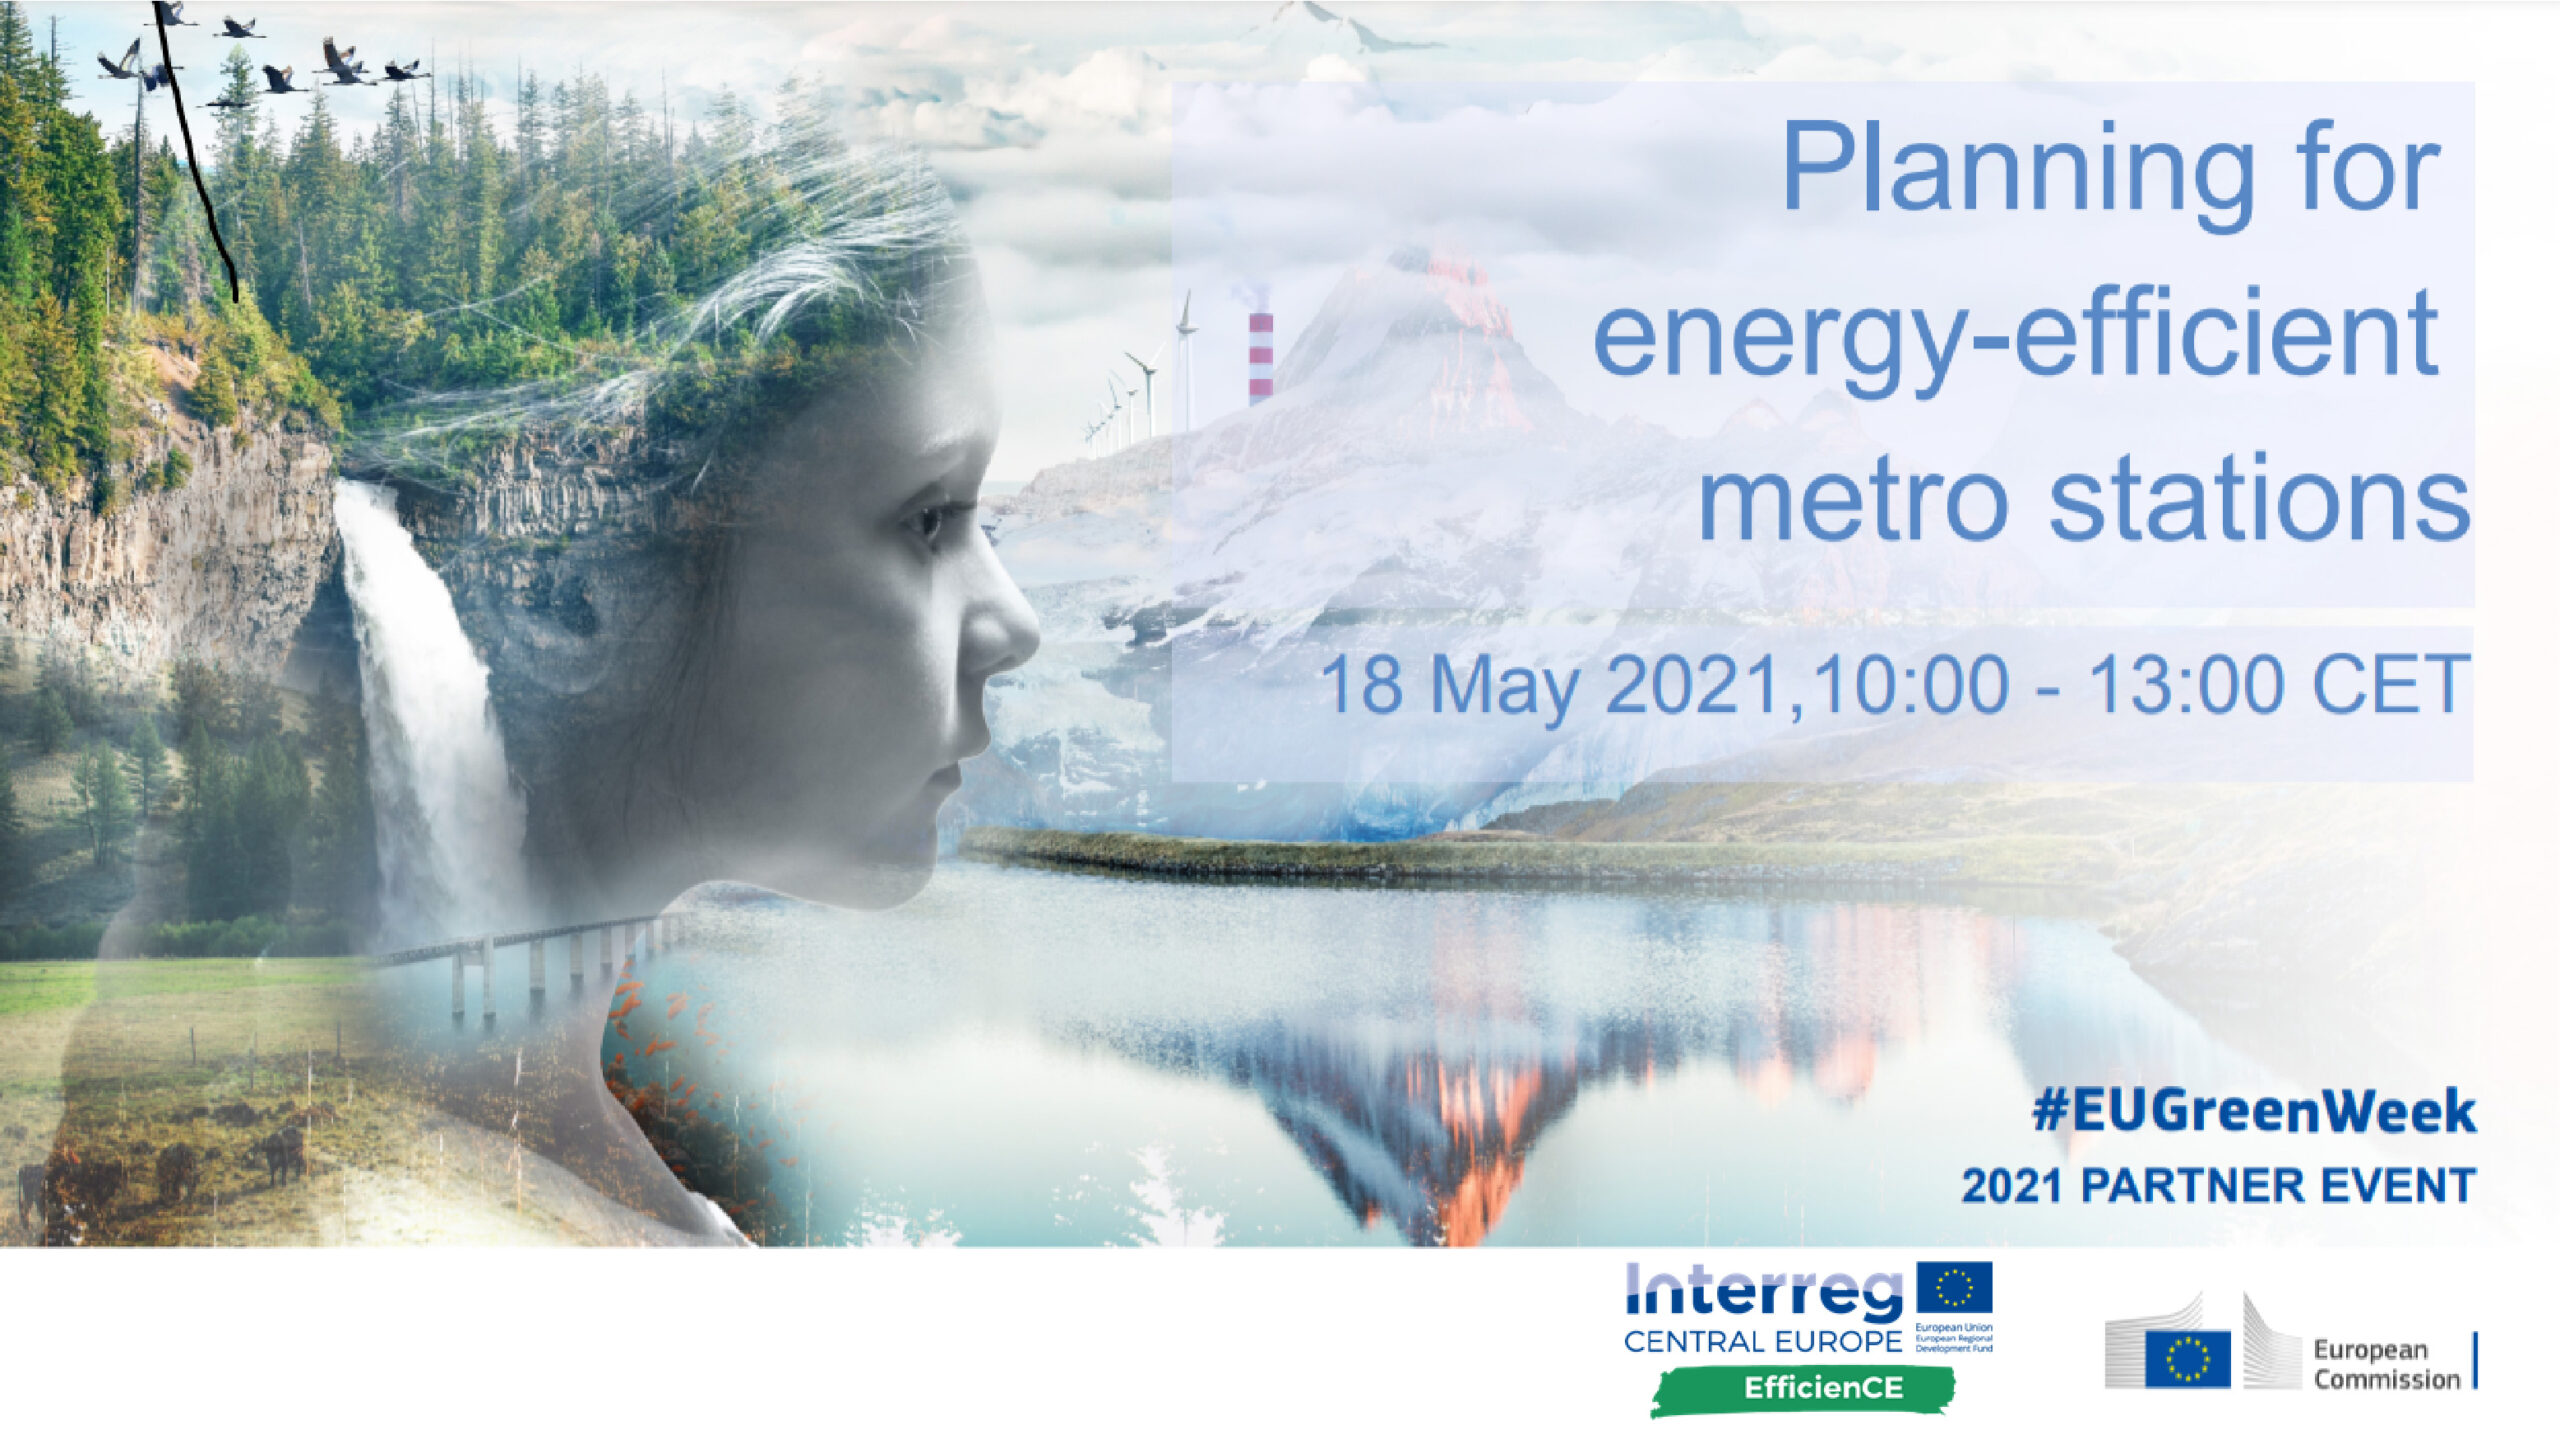 Transnational Webinar on Planning of Energy-Efficient Metro Stations